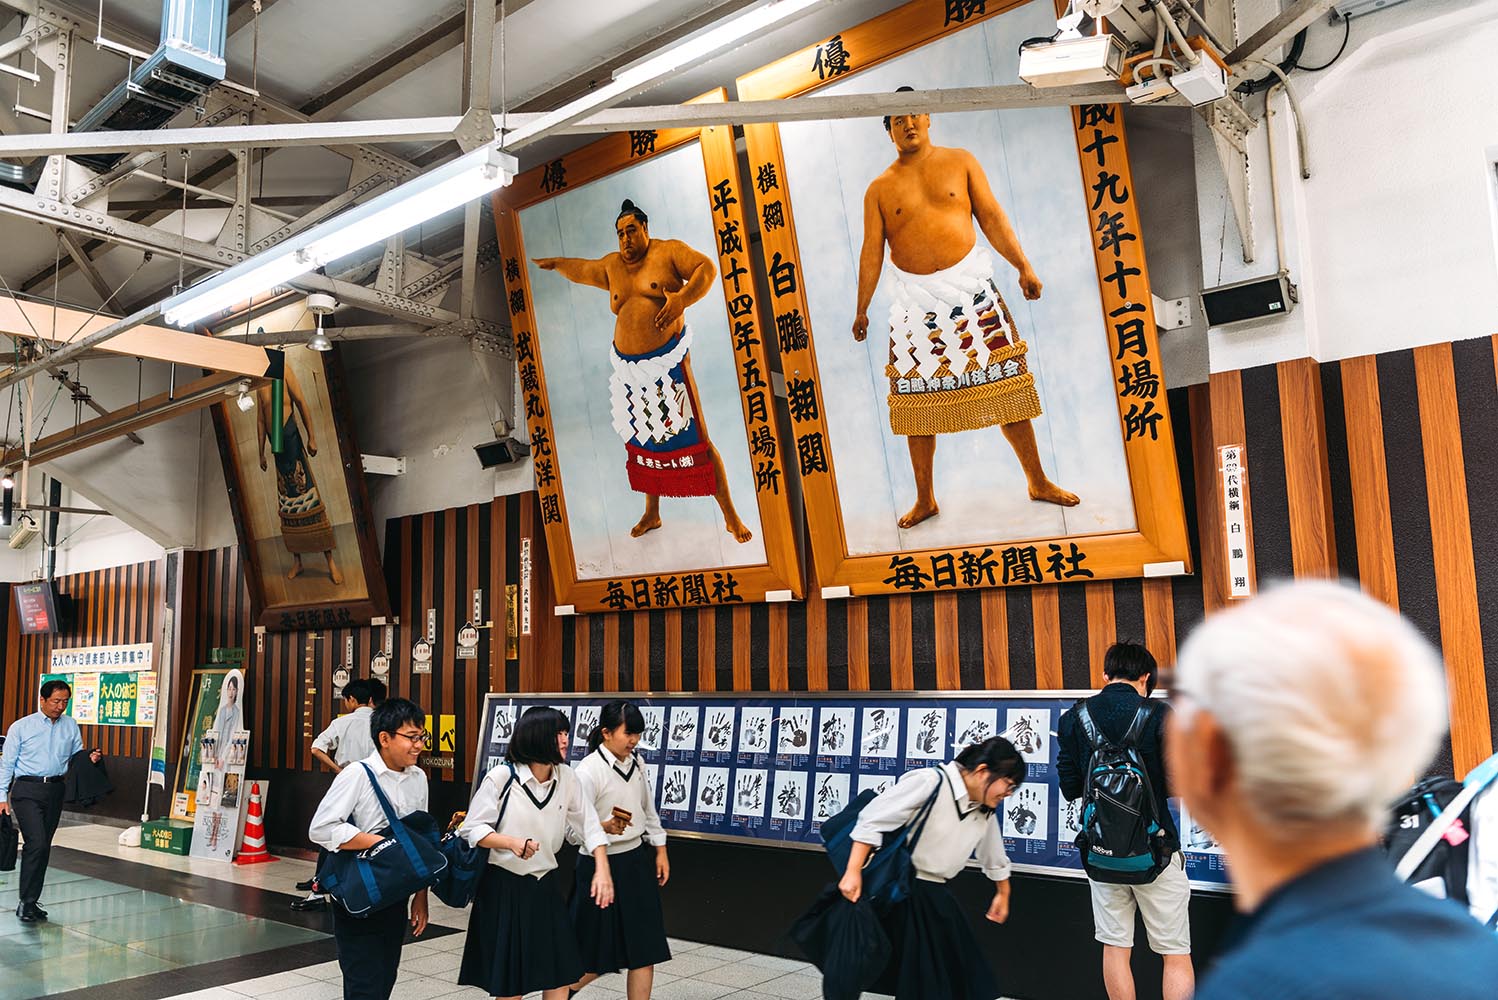 Subway station close to Arena for traditional Sumo wrestling in